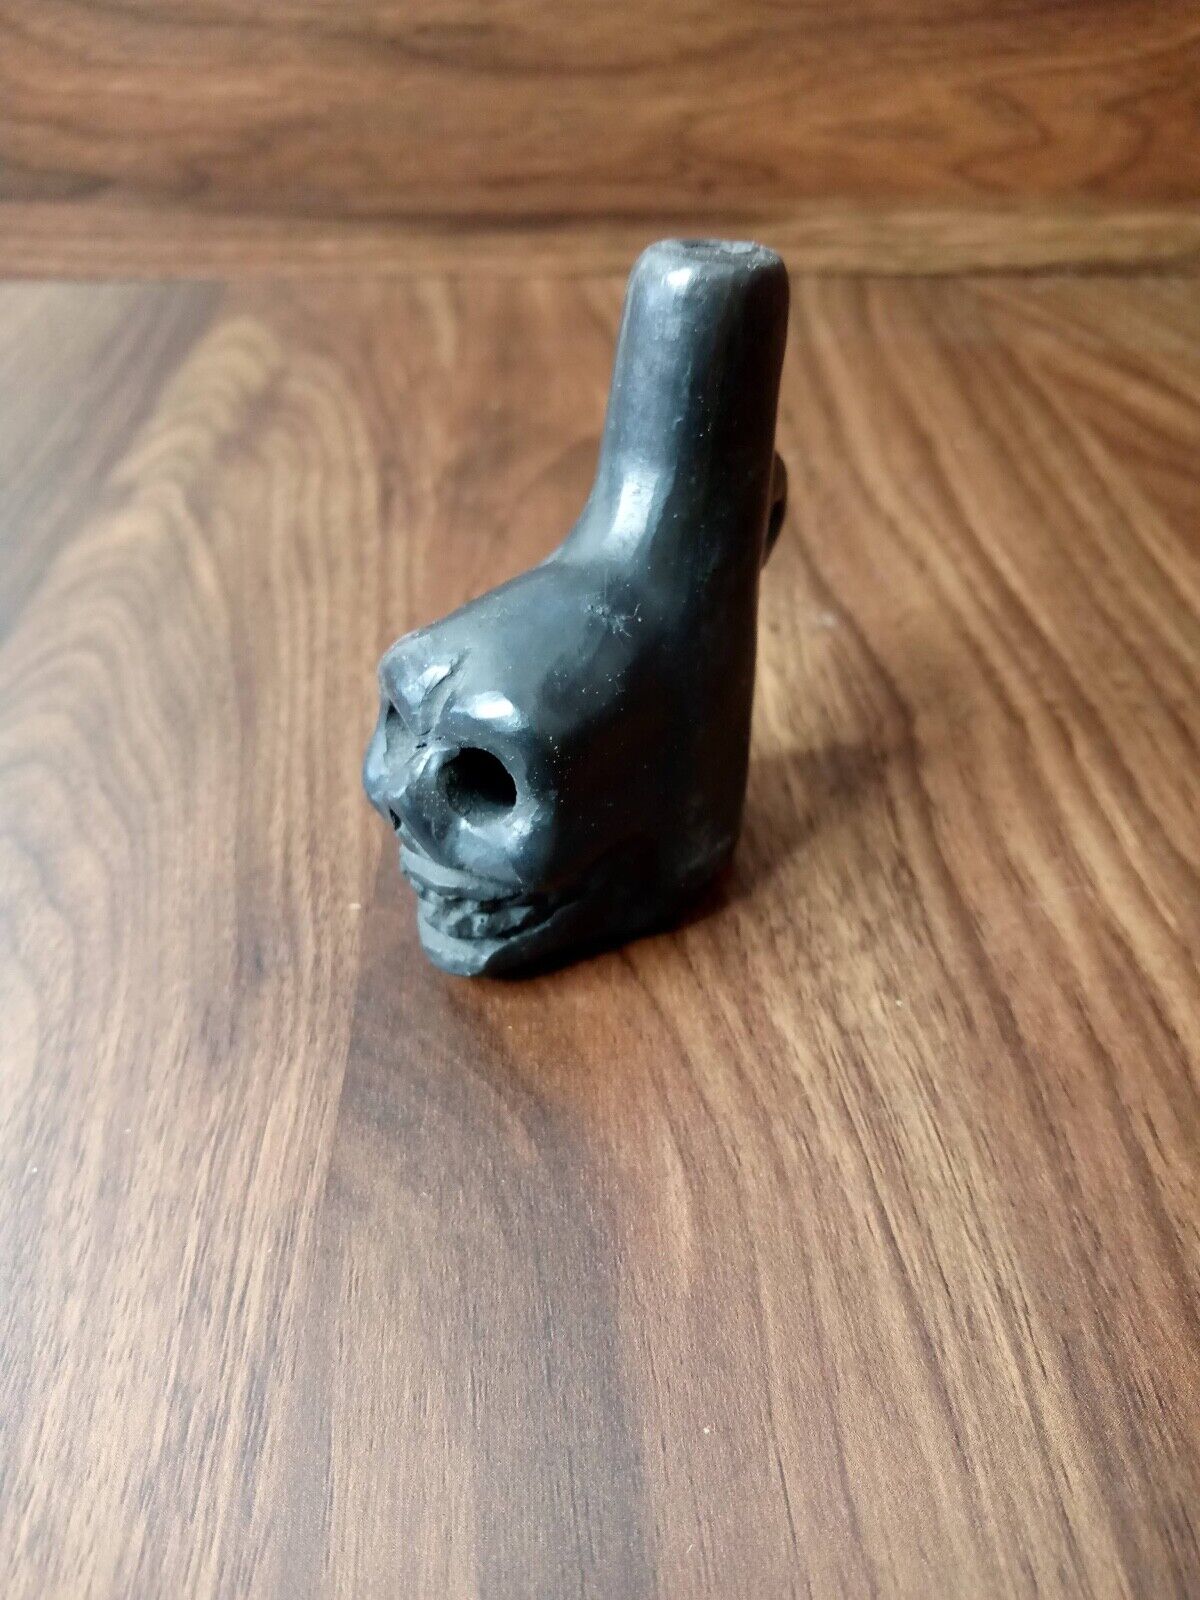 Death Whistle, Loud, Black, Small, Real, Aztec, Maya, Original, Hand Crafted.